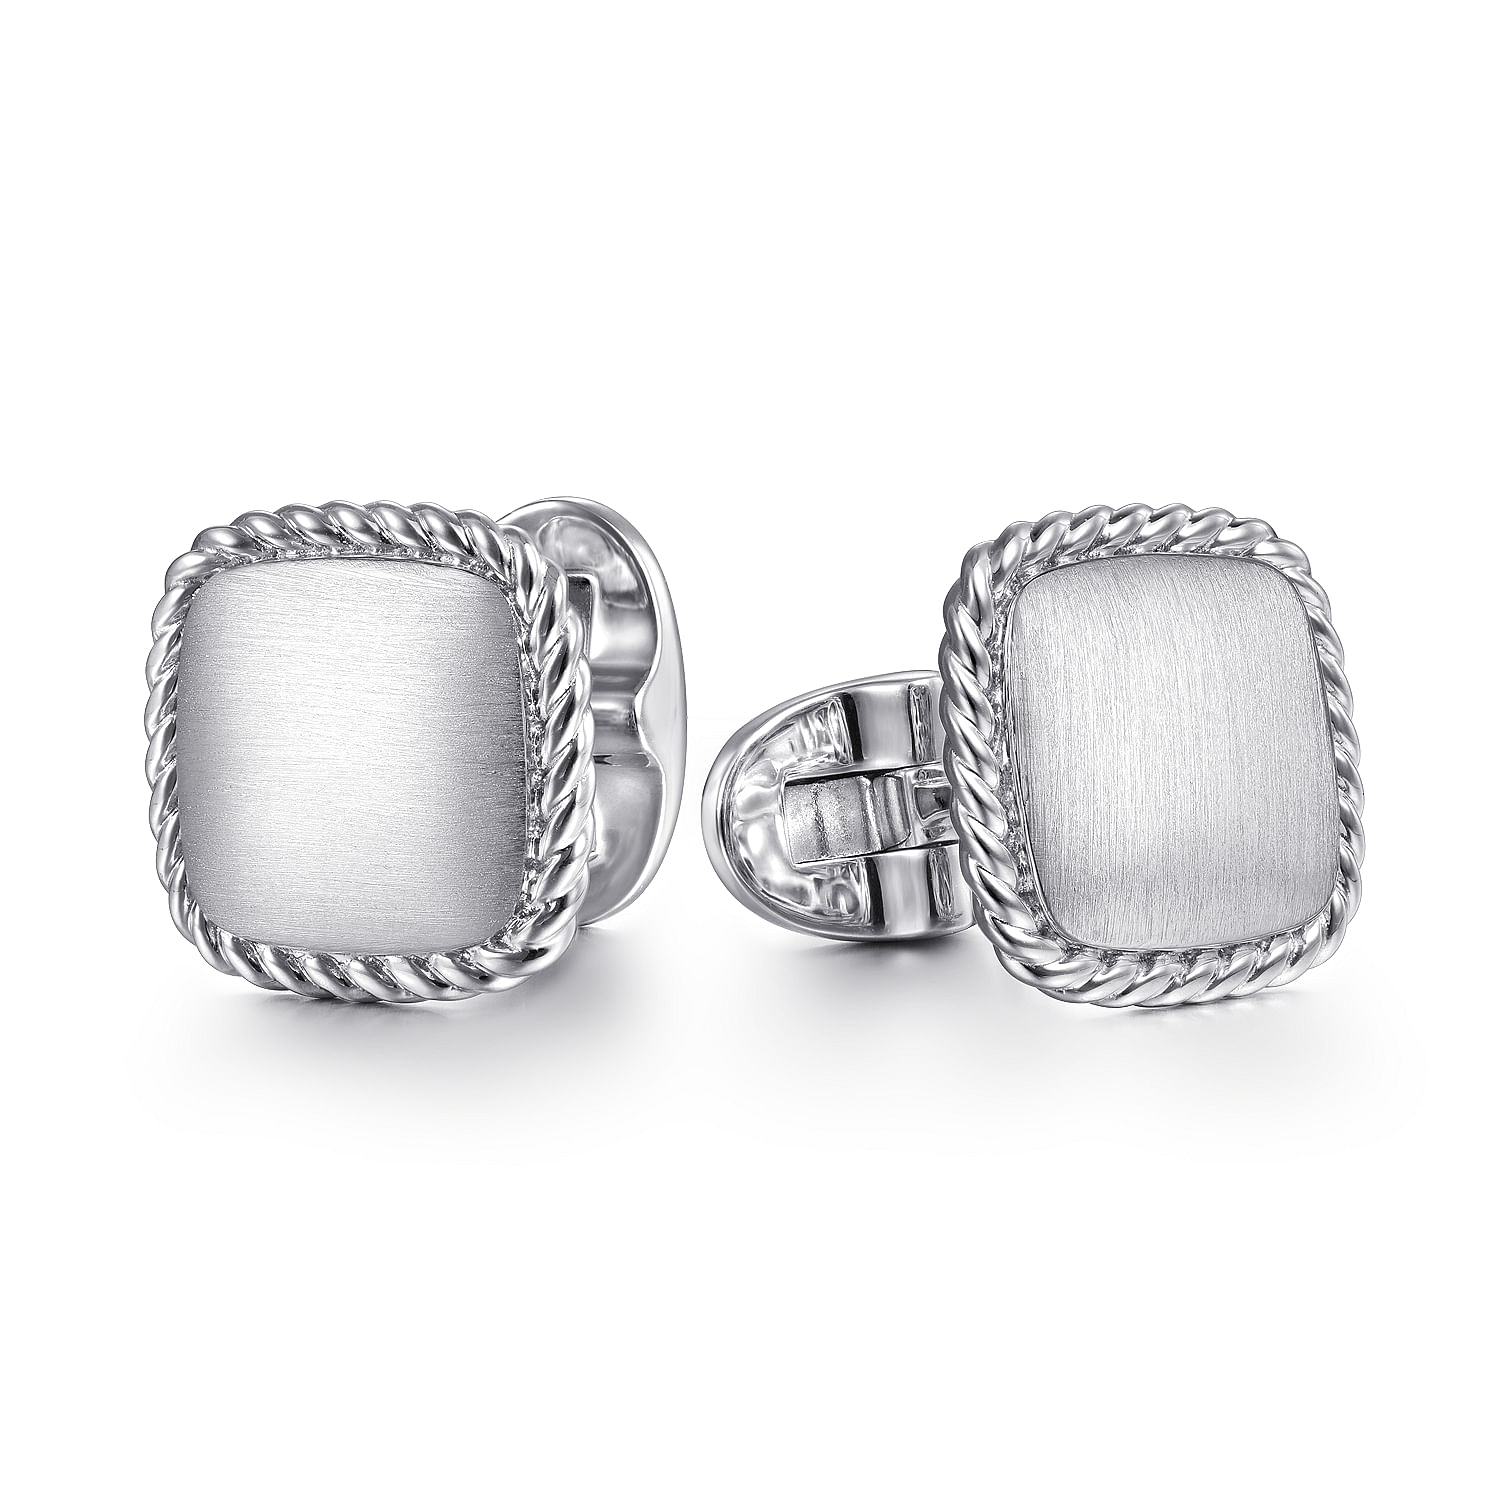 925-Sterling-Silver-Square-Cufflinks-with-Twisted-Rope-Trim1